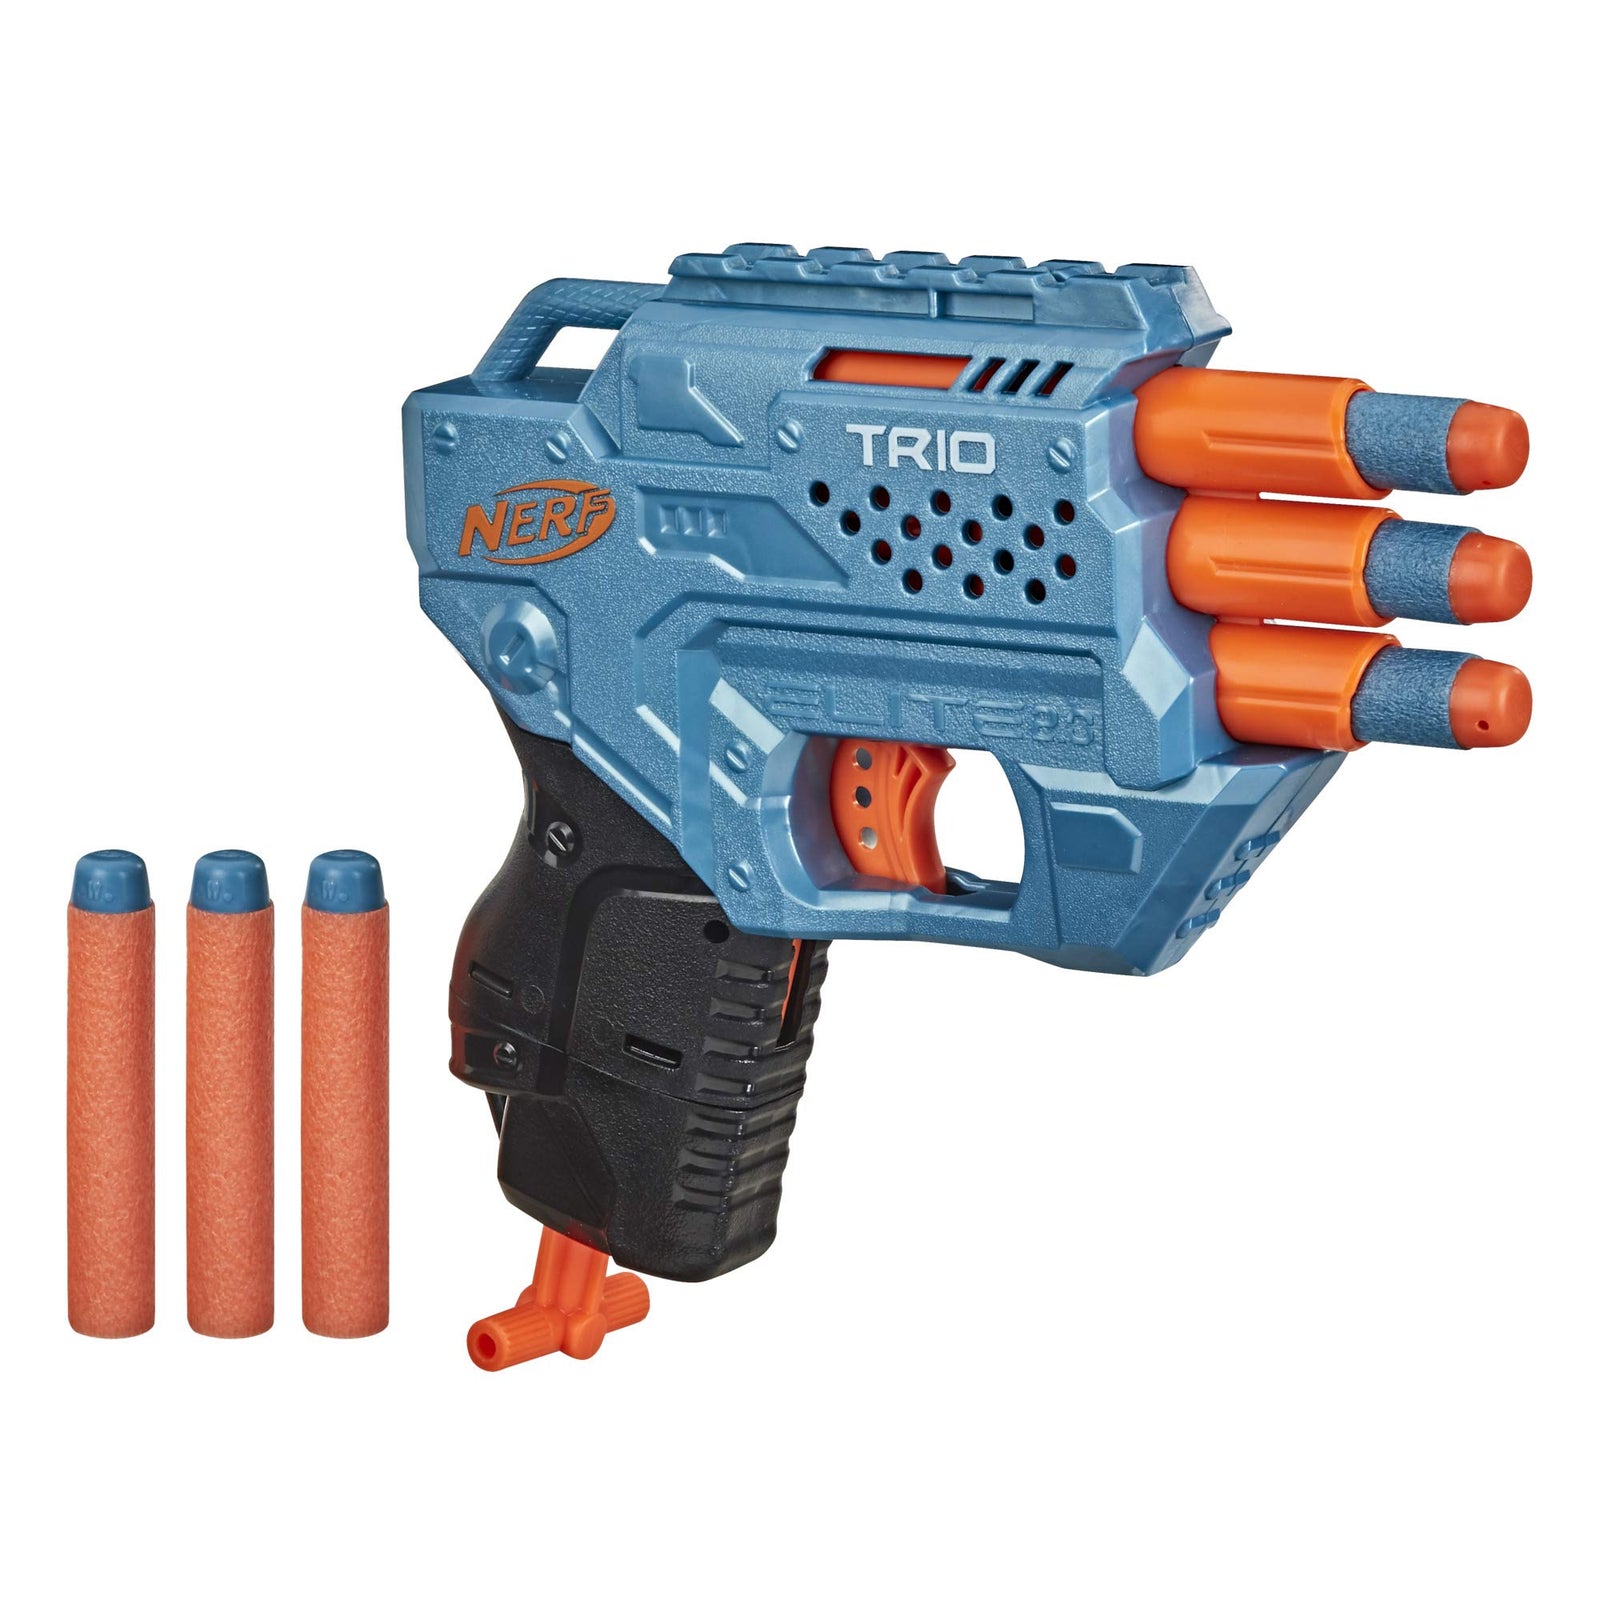 NERF Elite 2.0 Trio SD-3 Blaster -- Includes 6 Official Darts -- 3-Barrel Blasting -- Tactical Rail for Customizing Capability